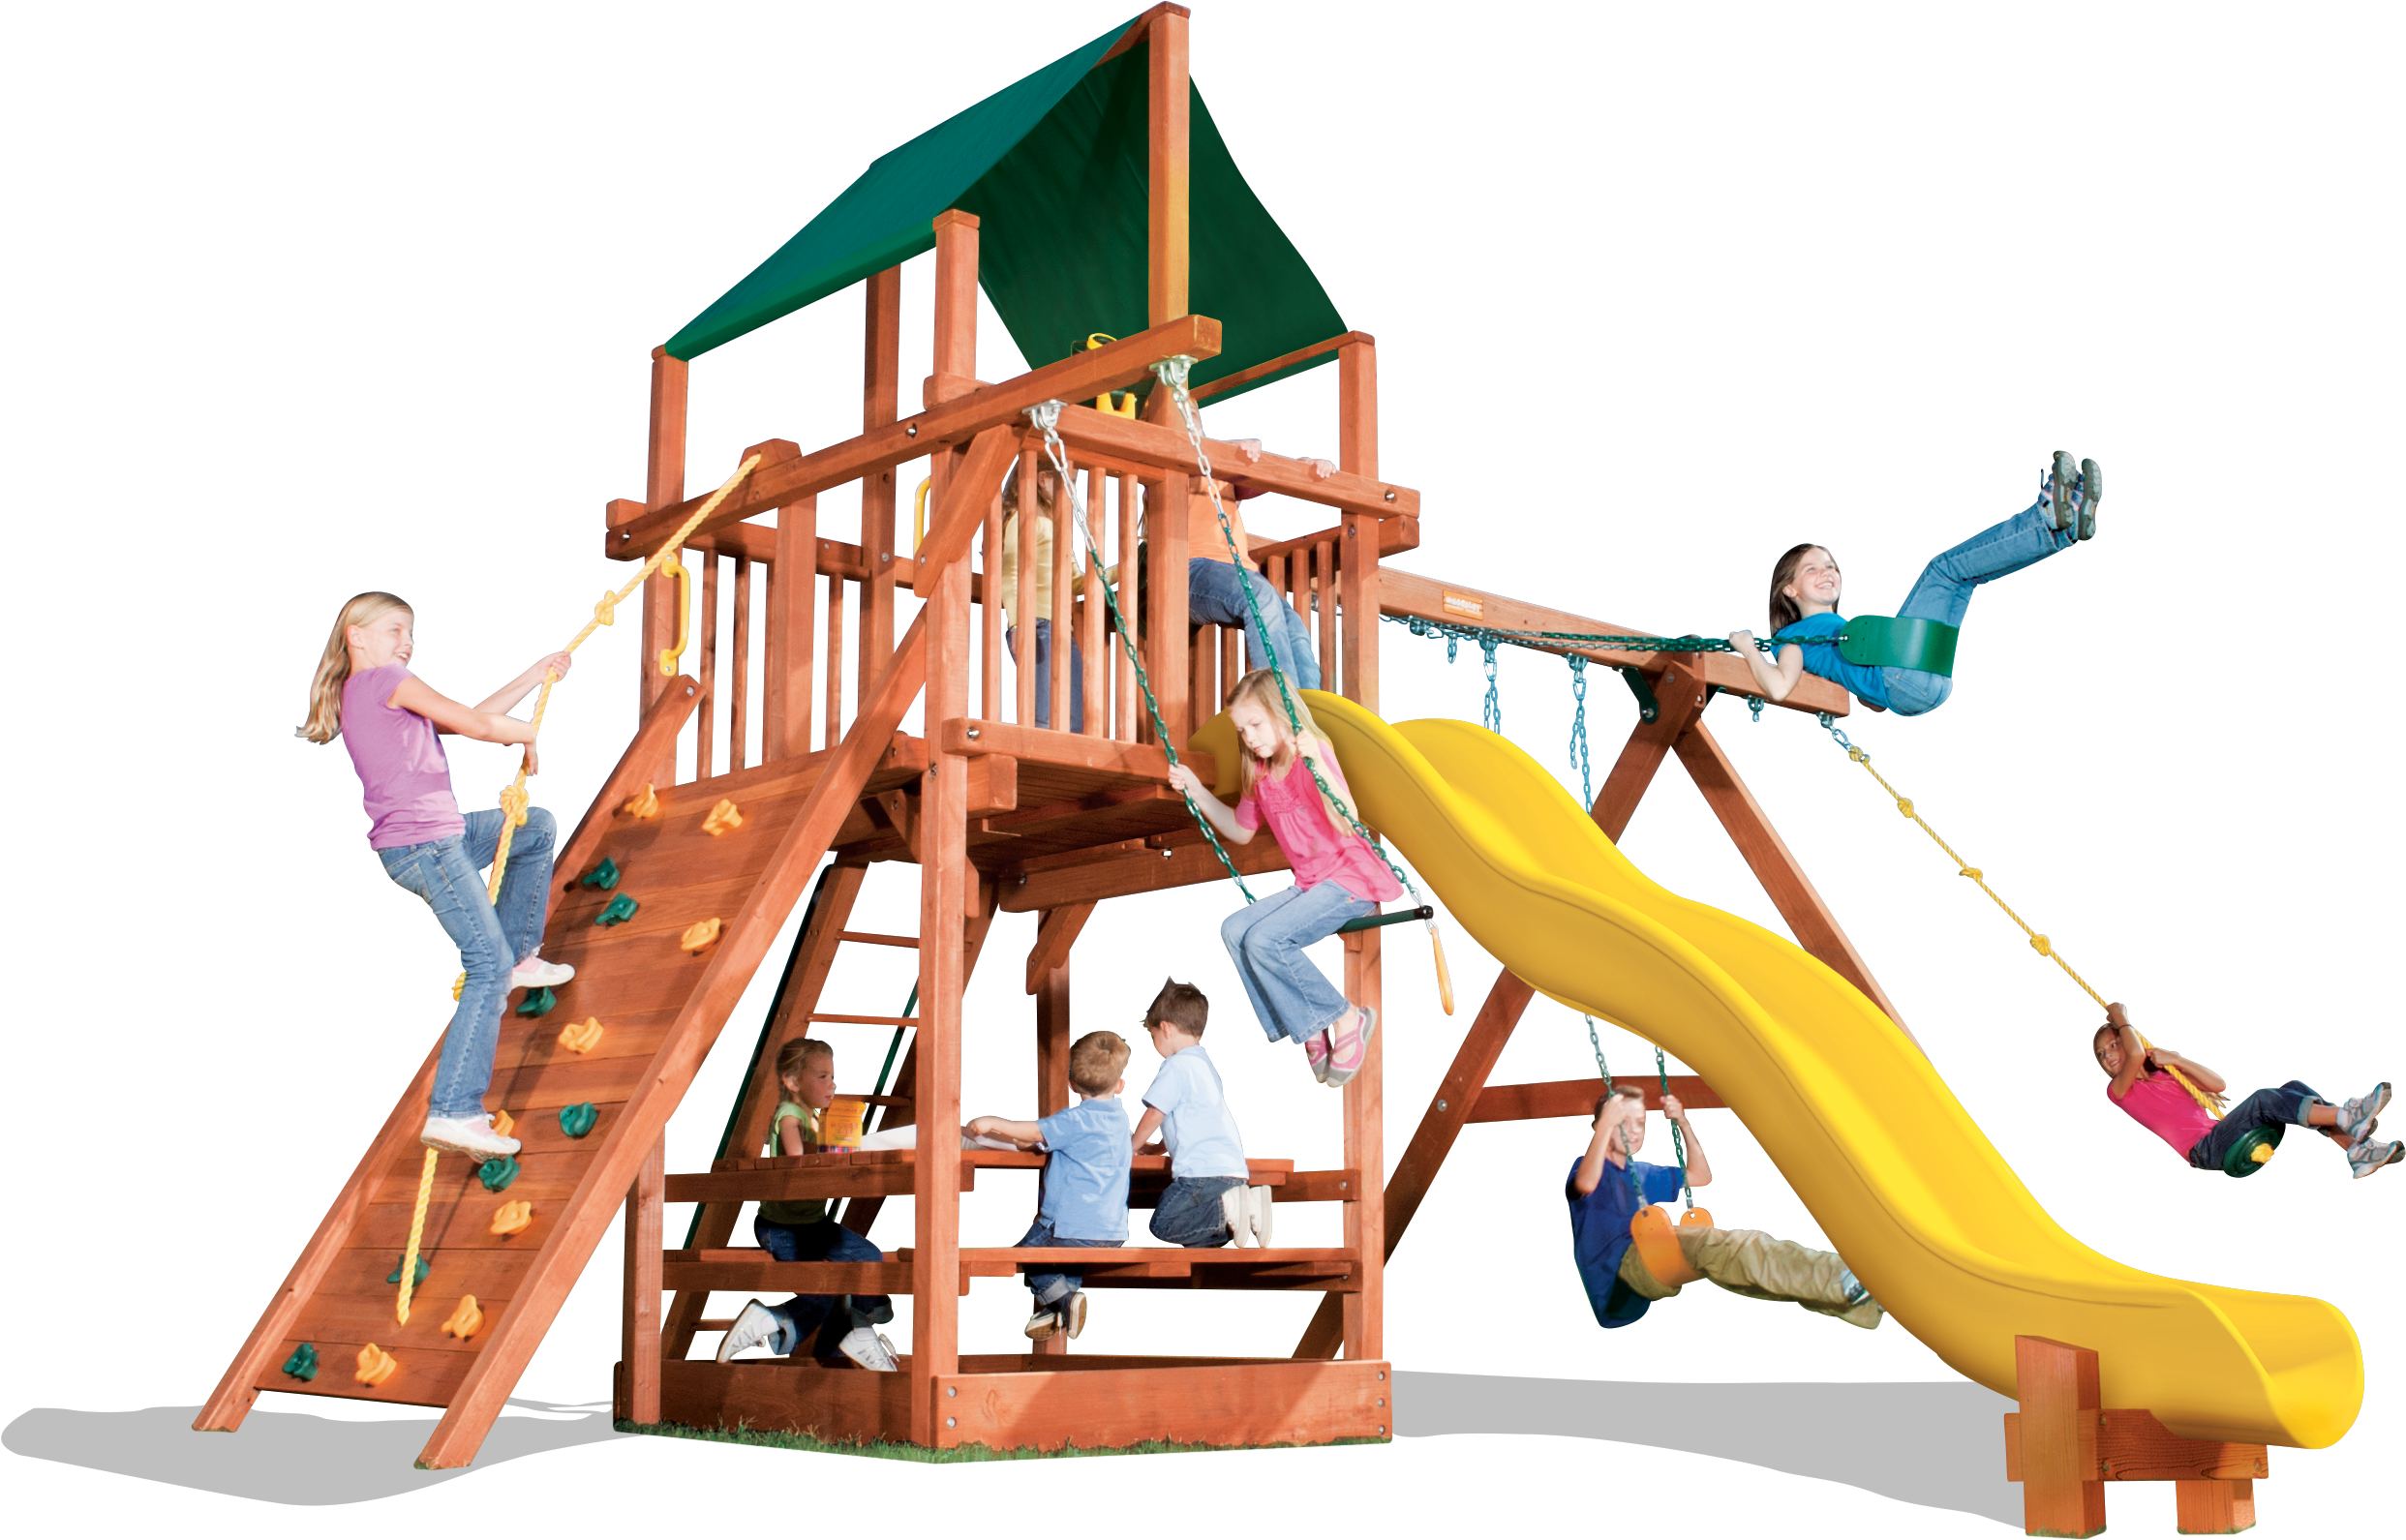 Product Categories - Playground Slide (2551x1628)